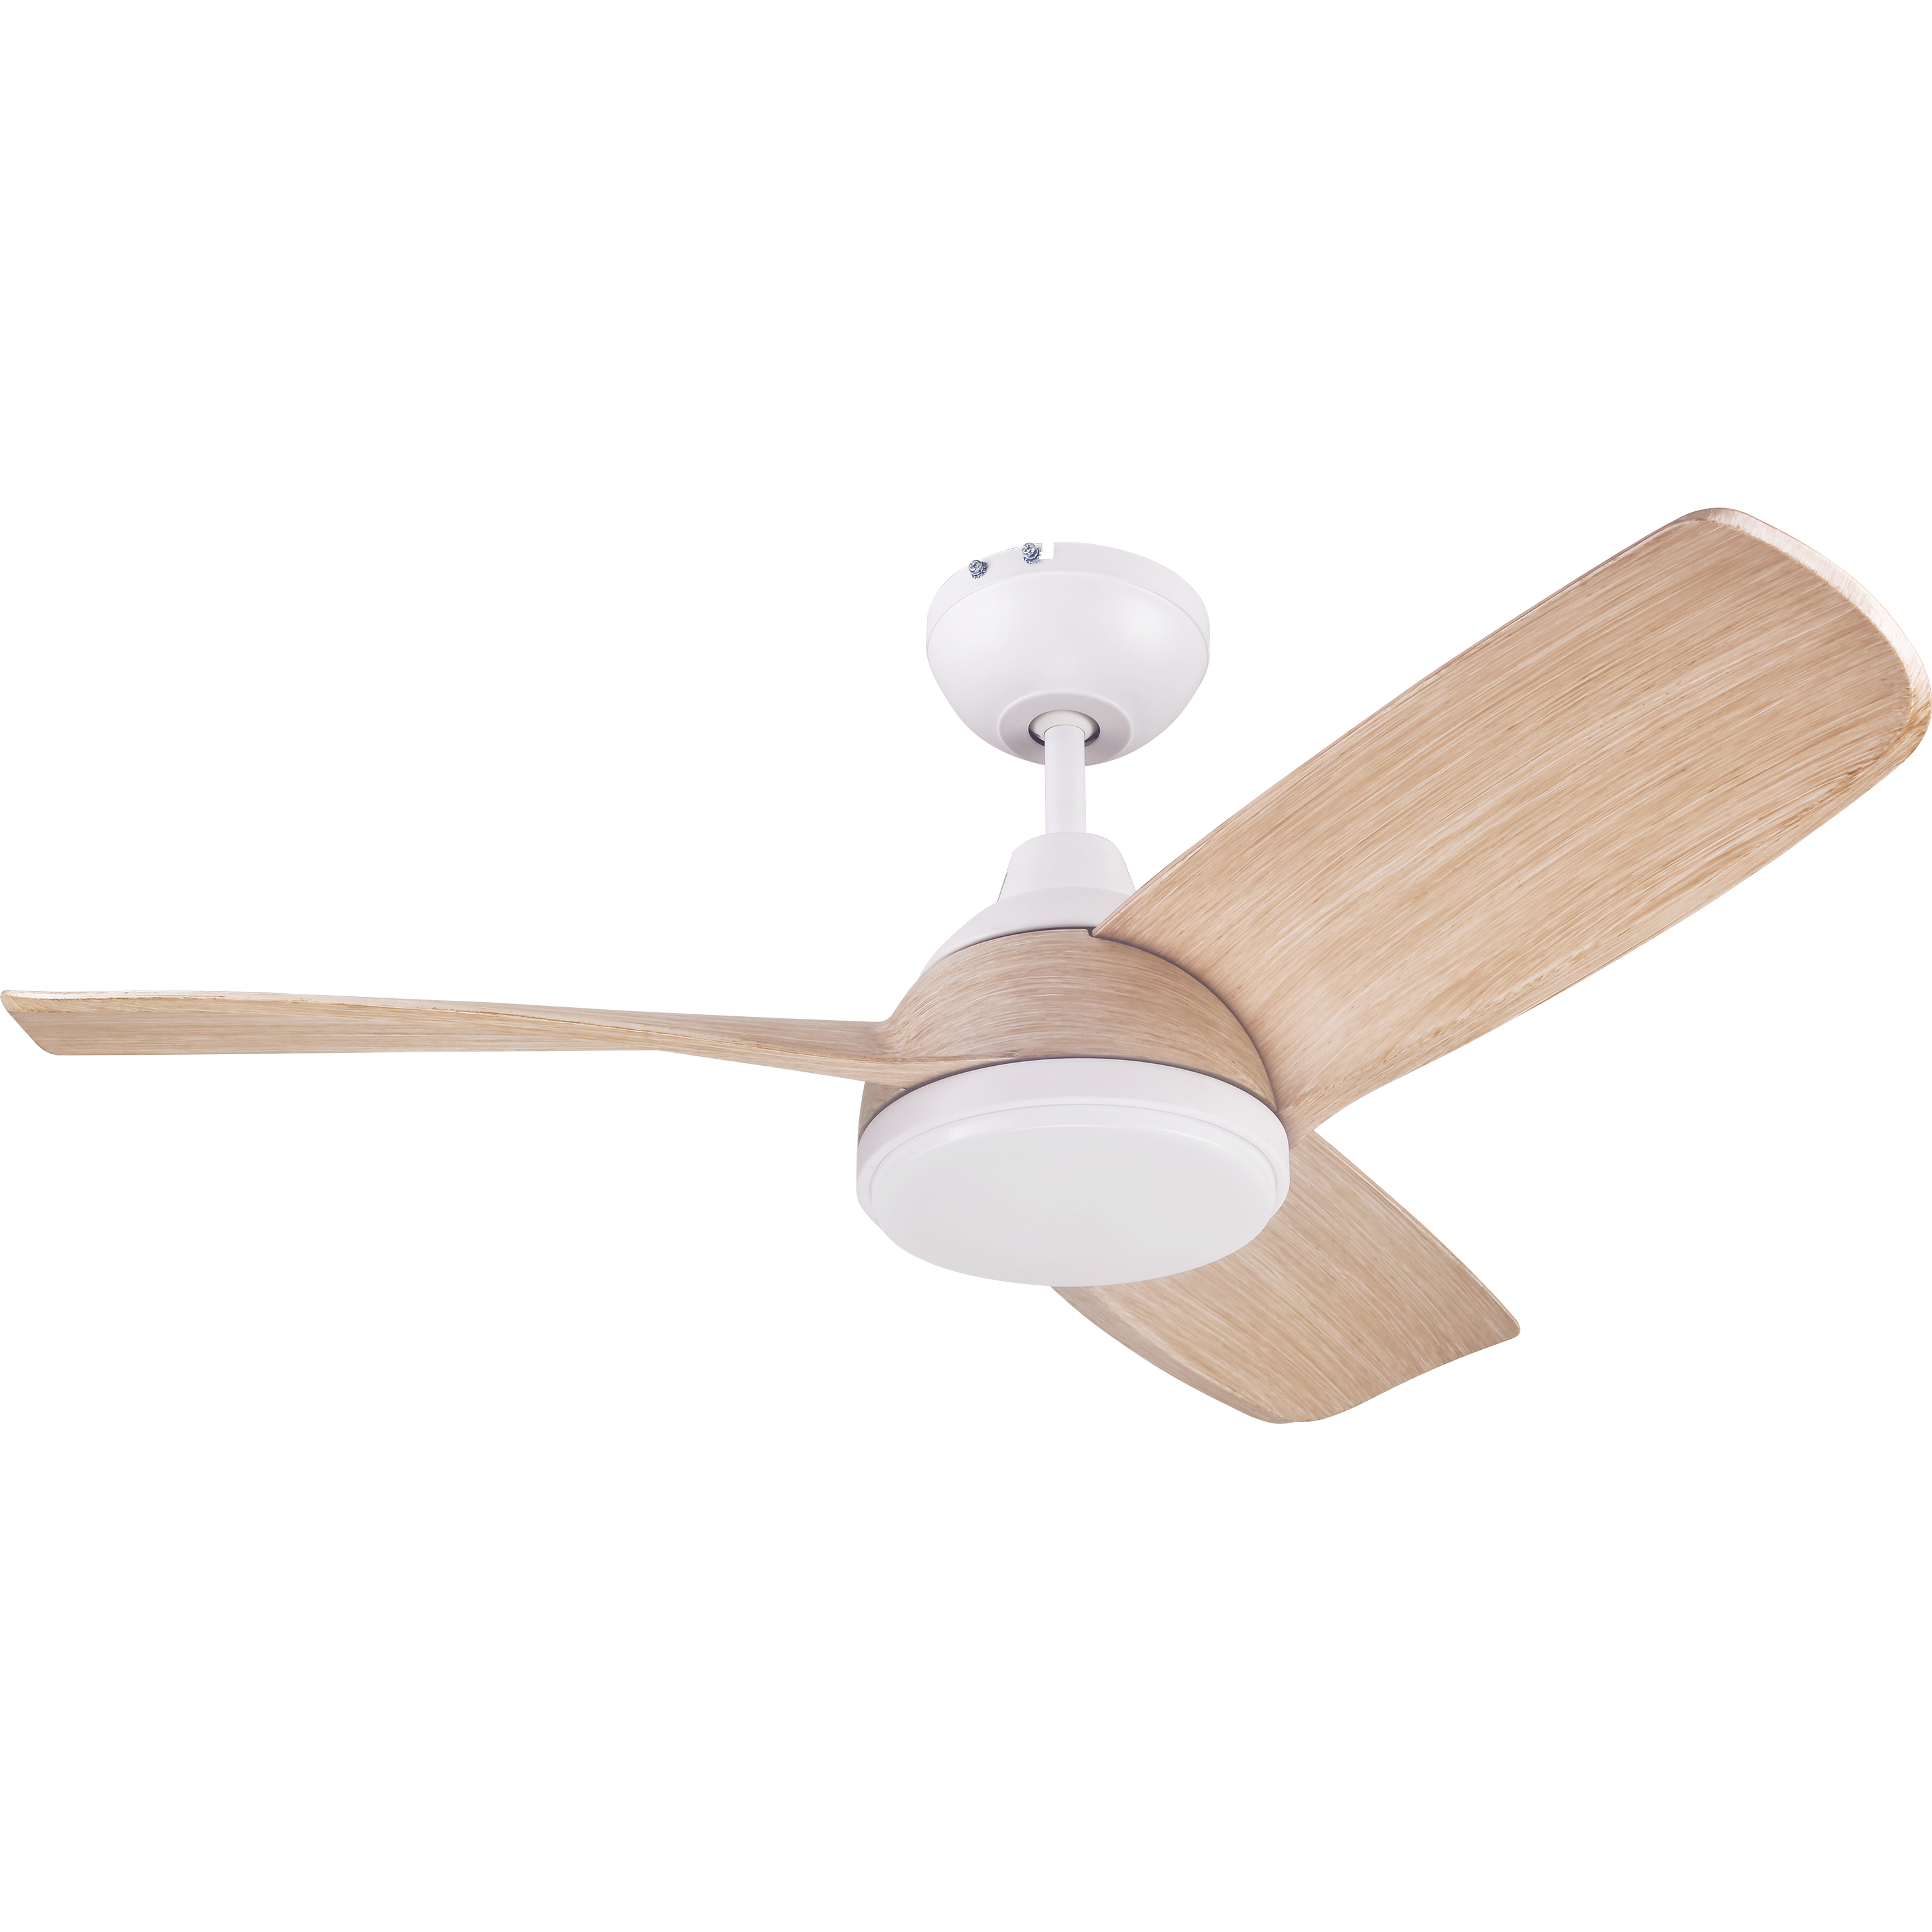 CHERCH WOOD EFFECT CEILING FAN D107 CM LED 28W 2200LM CCT DIMMABLE 3 BLADES - best price from Maltashopper.com BR420007453